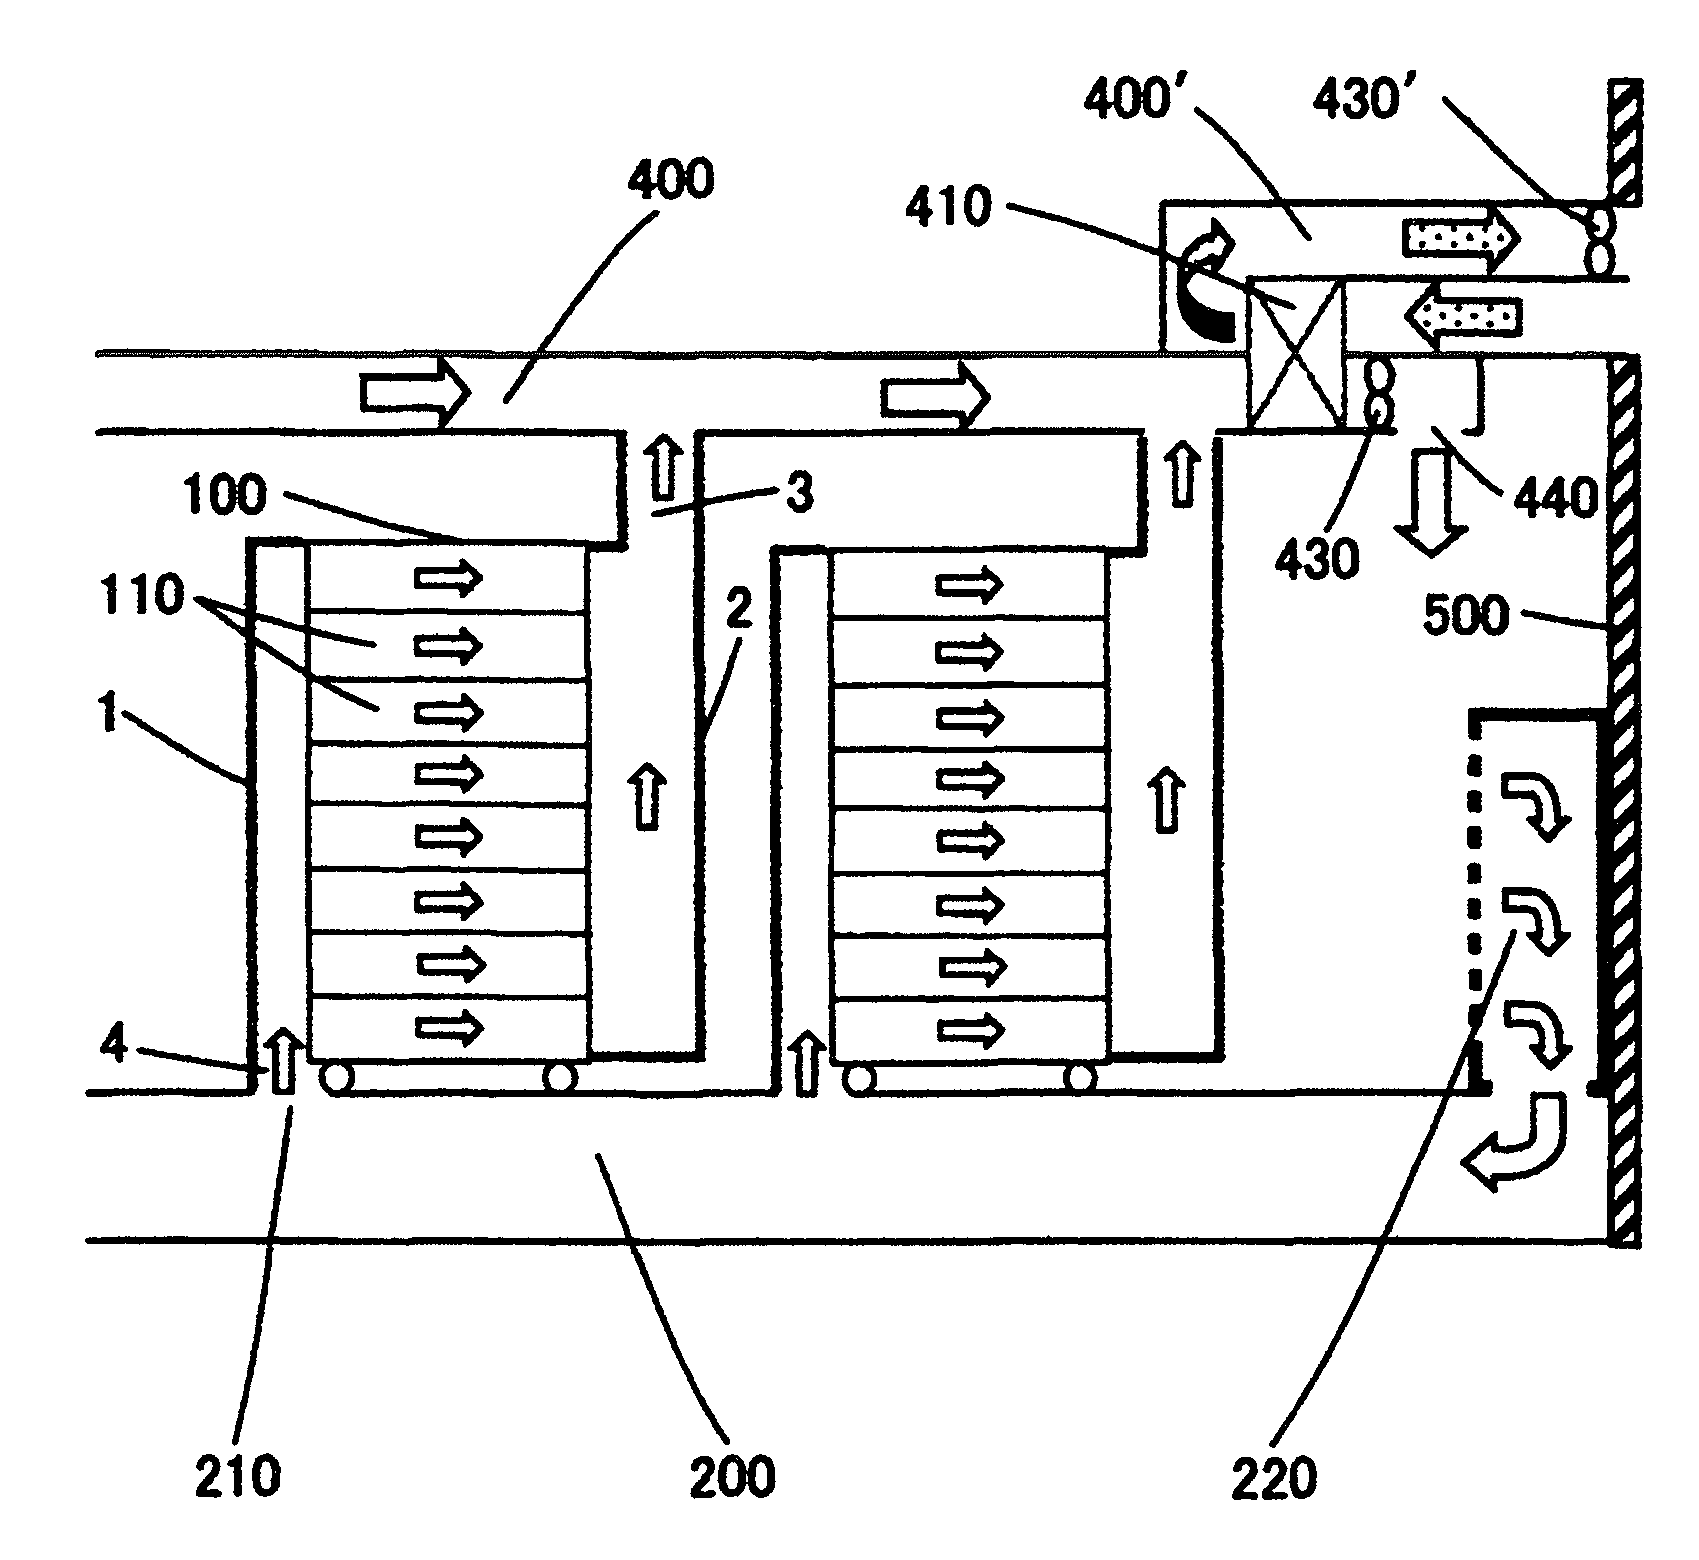 Cooling systems and electronic apparatus